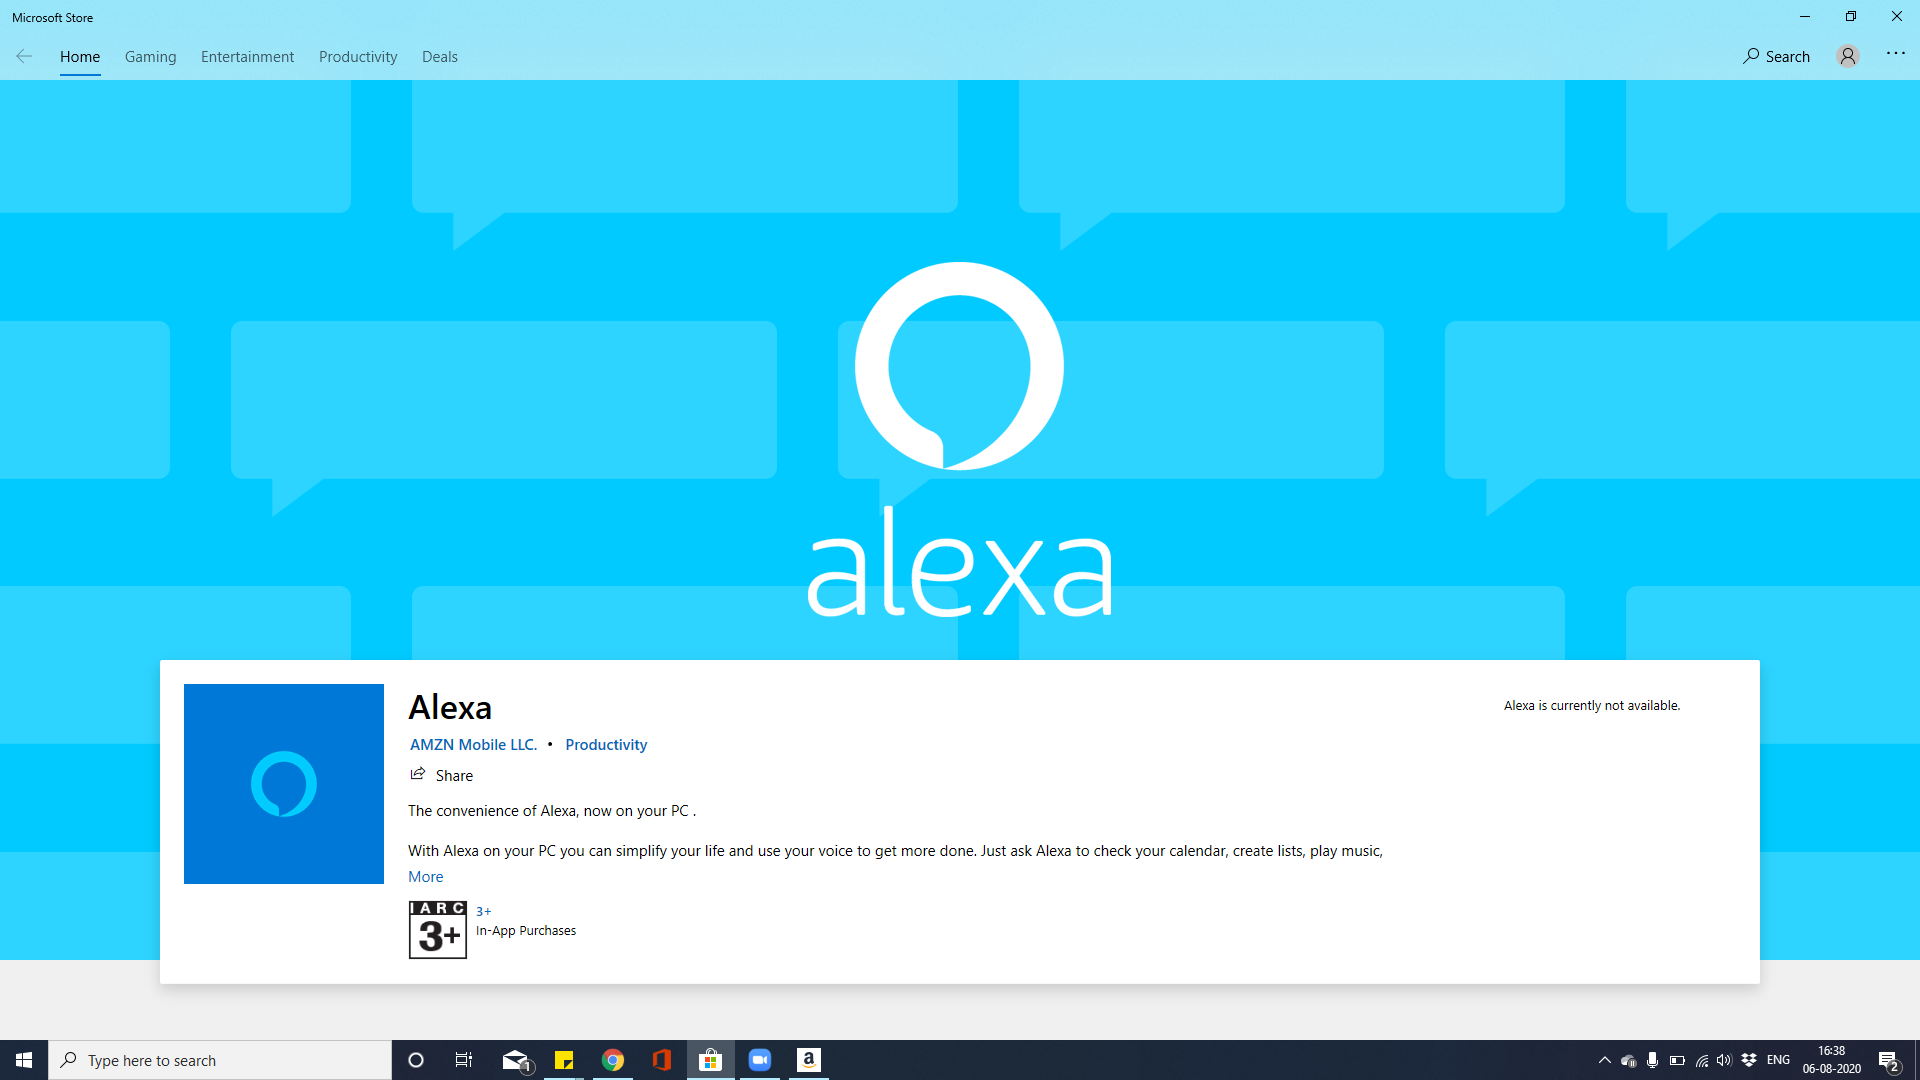 I am unable to install alexa in my PC. The Microsoft store is showing  unavailability of...